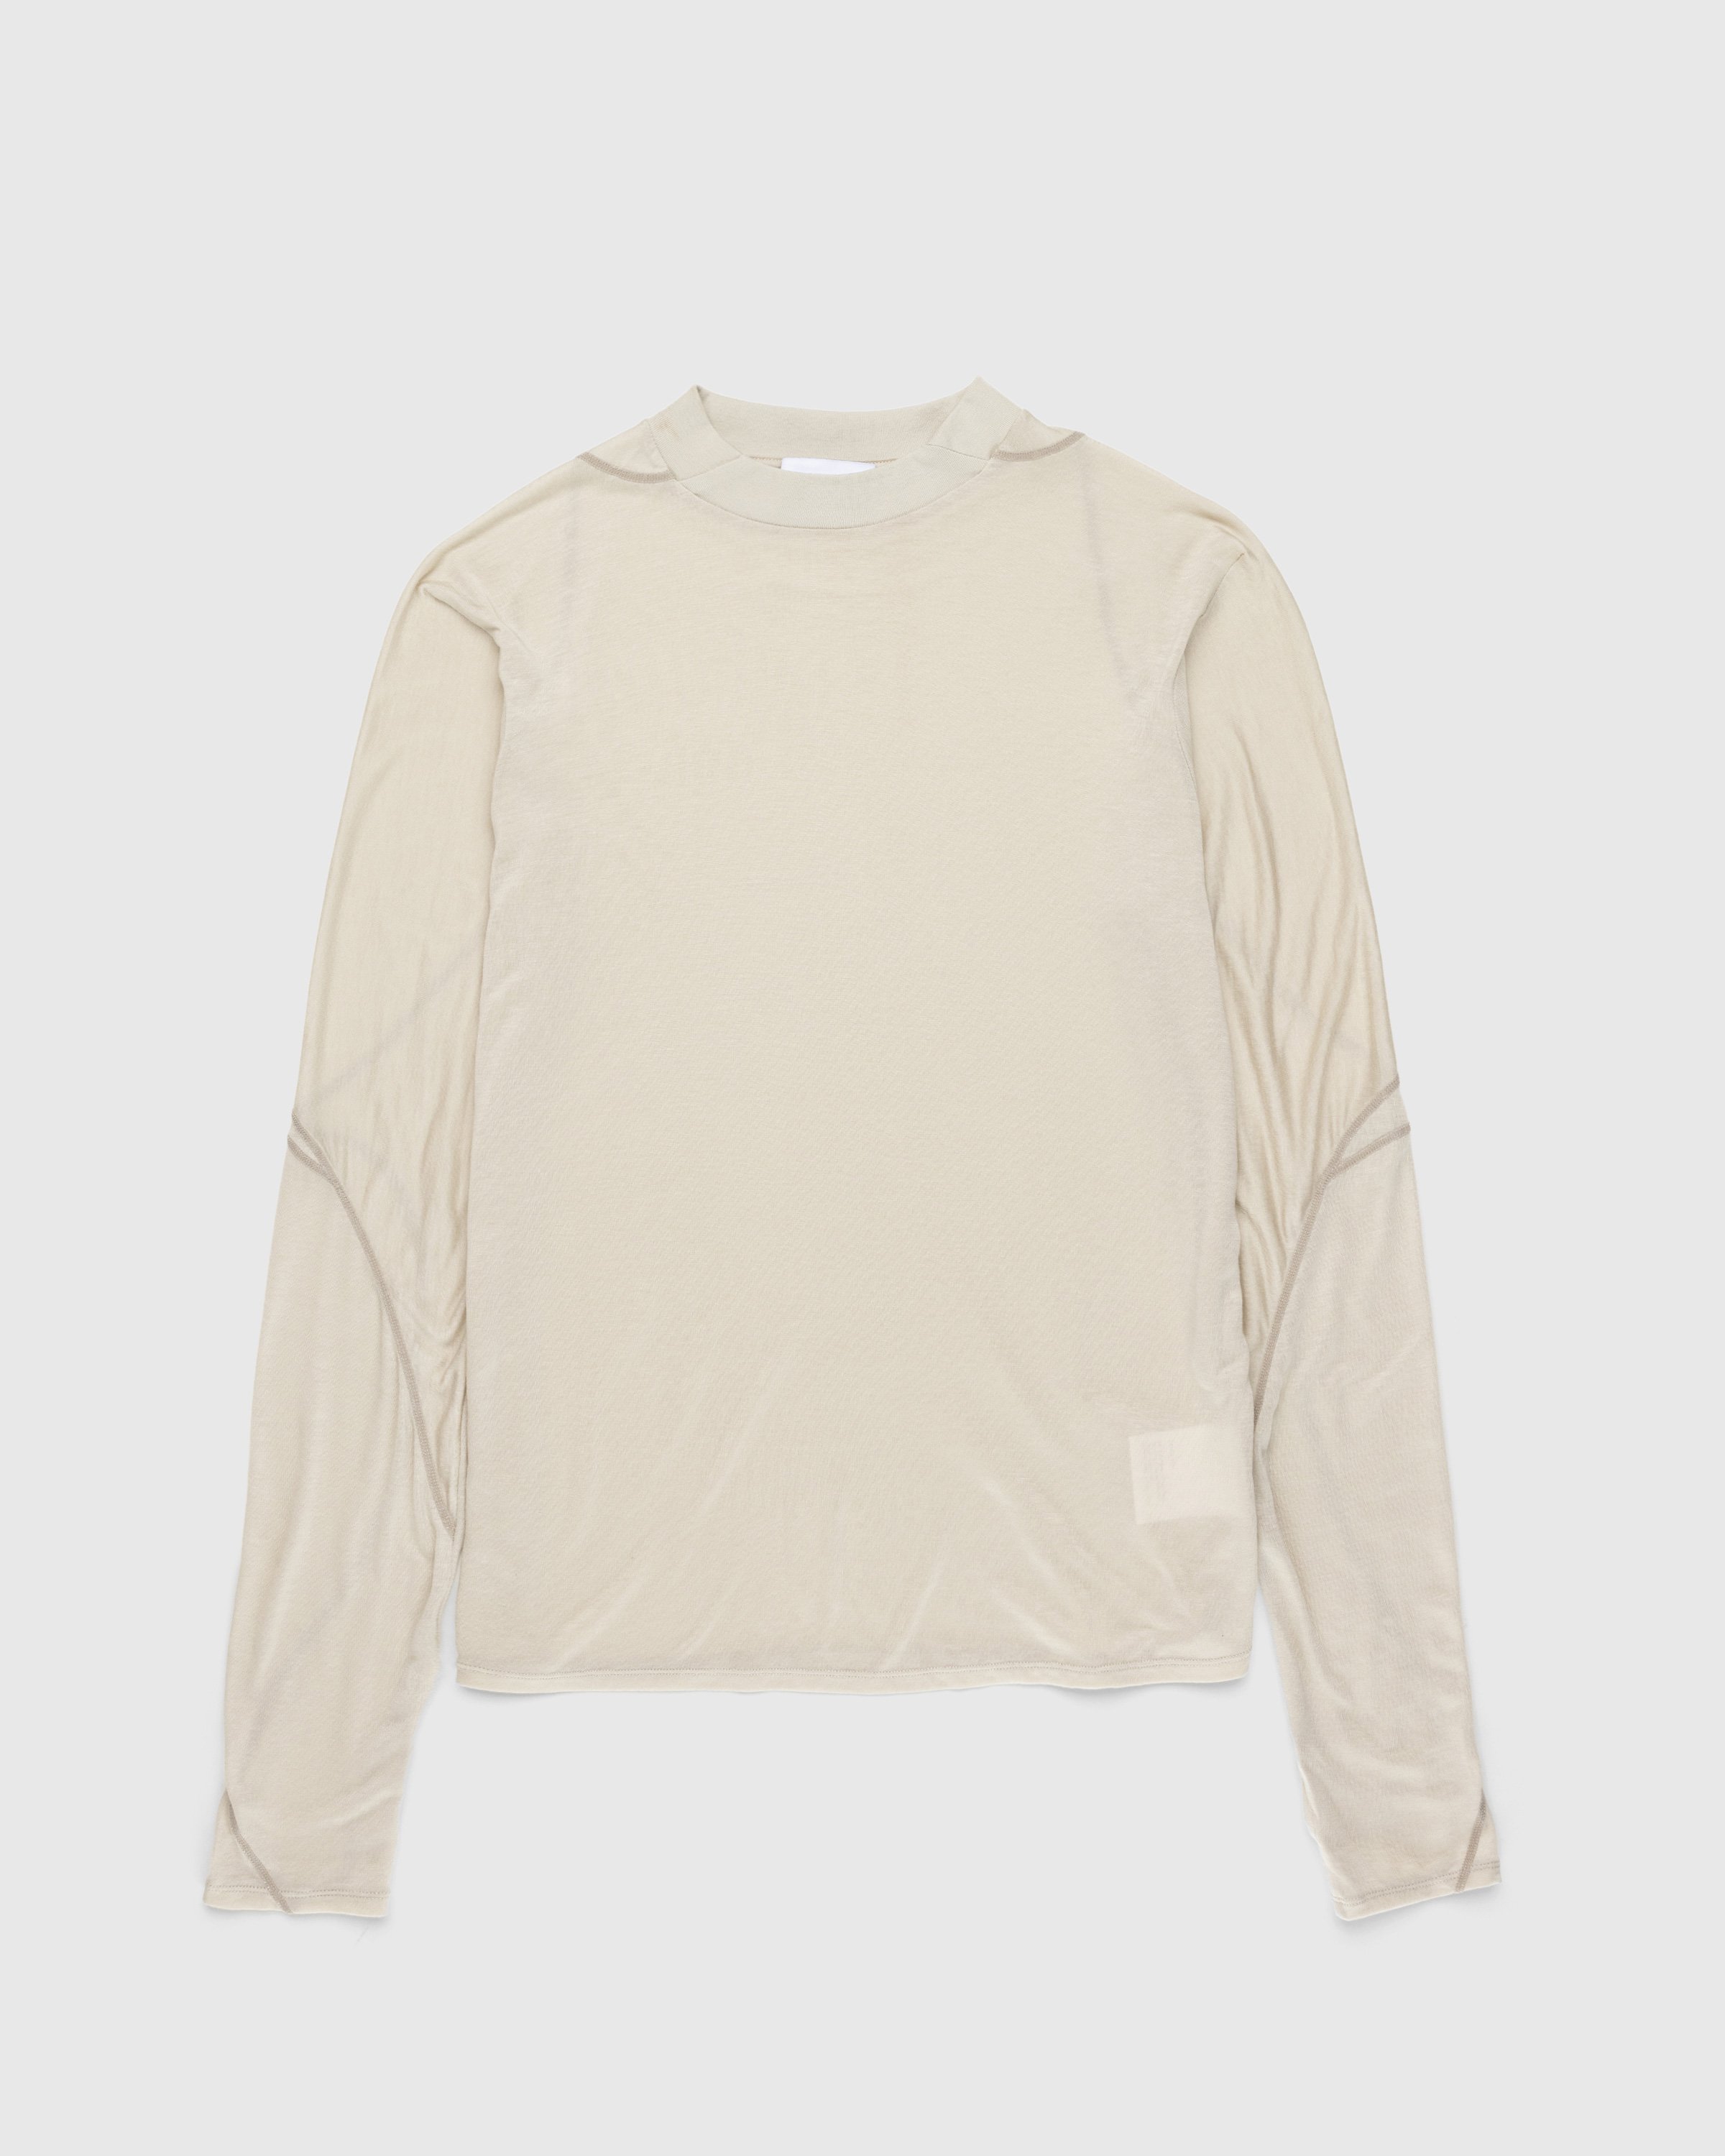 Post Archive Faction (PAF) - 5.0+ Longsleeve Right Oat - Clothing - Beige - Image 1